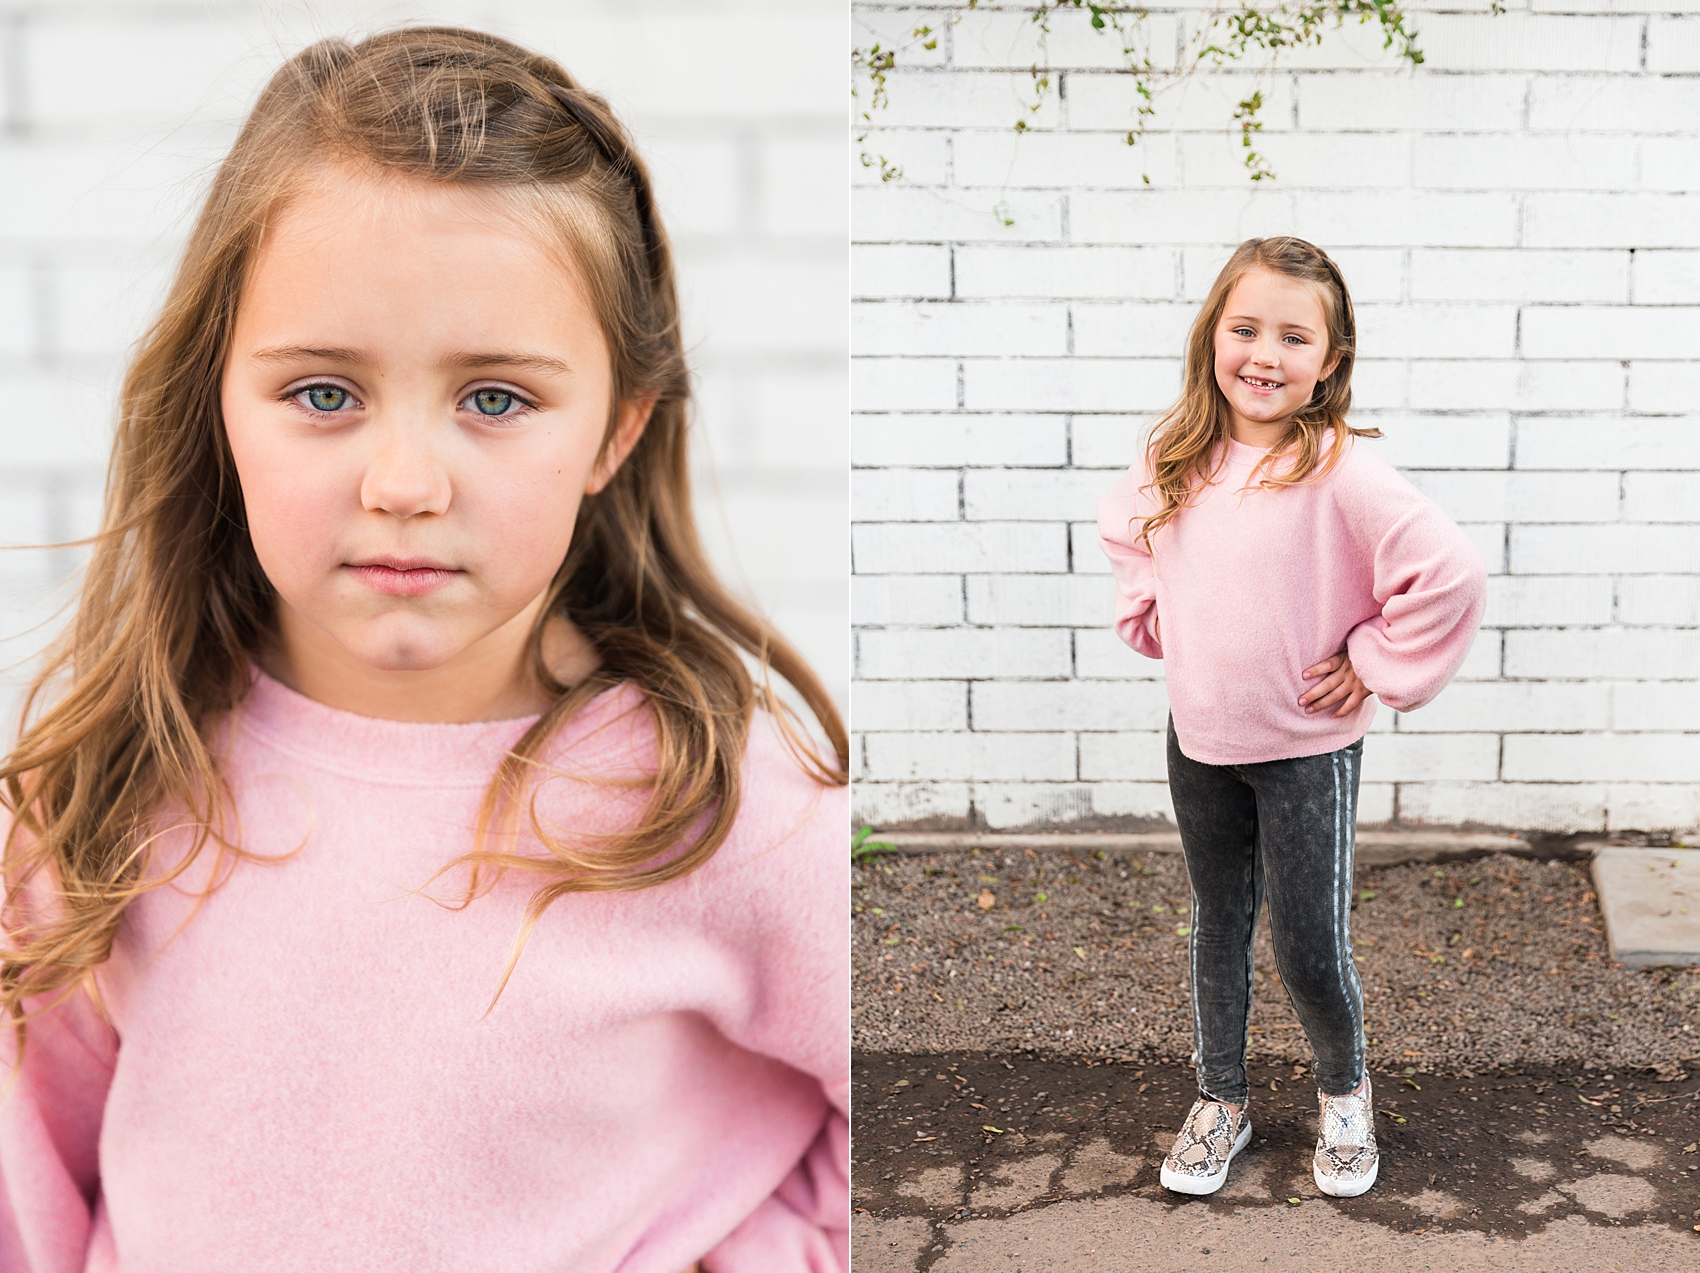 Leah Hope Photography | Scottsdale Phoenix Arizona Photographer | Downtown Phoenix | Family Pictures | Family Photos | What to Wear | Family Poses | Phoenix Police Officer | Pops of Pink